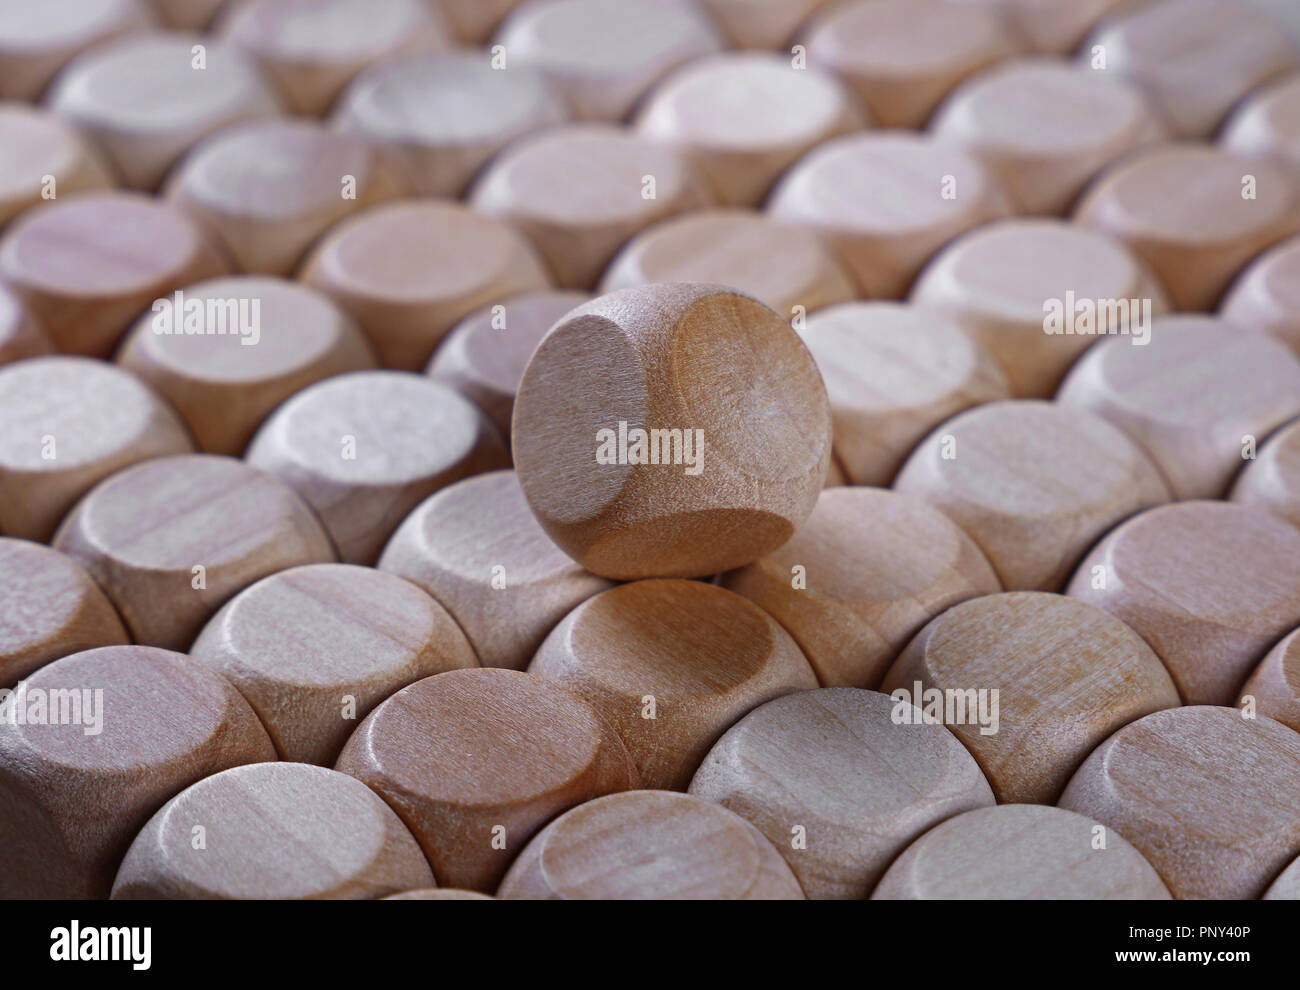 Close up background pattern of natural wooden dice shaped toy building blocks, high angle view perspective Stock Photo